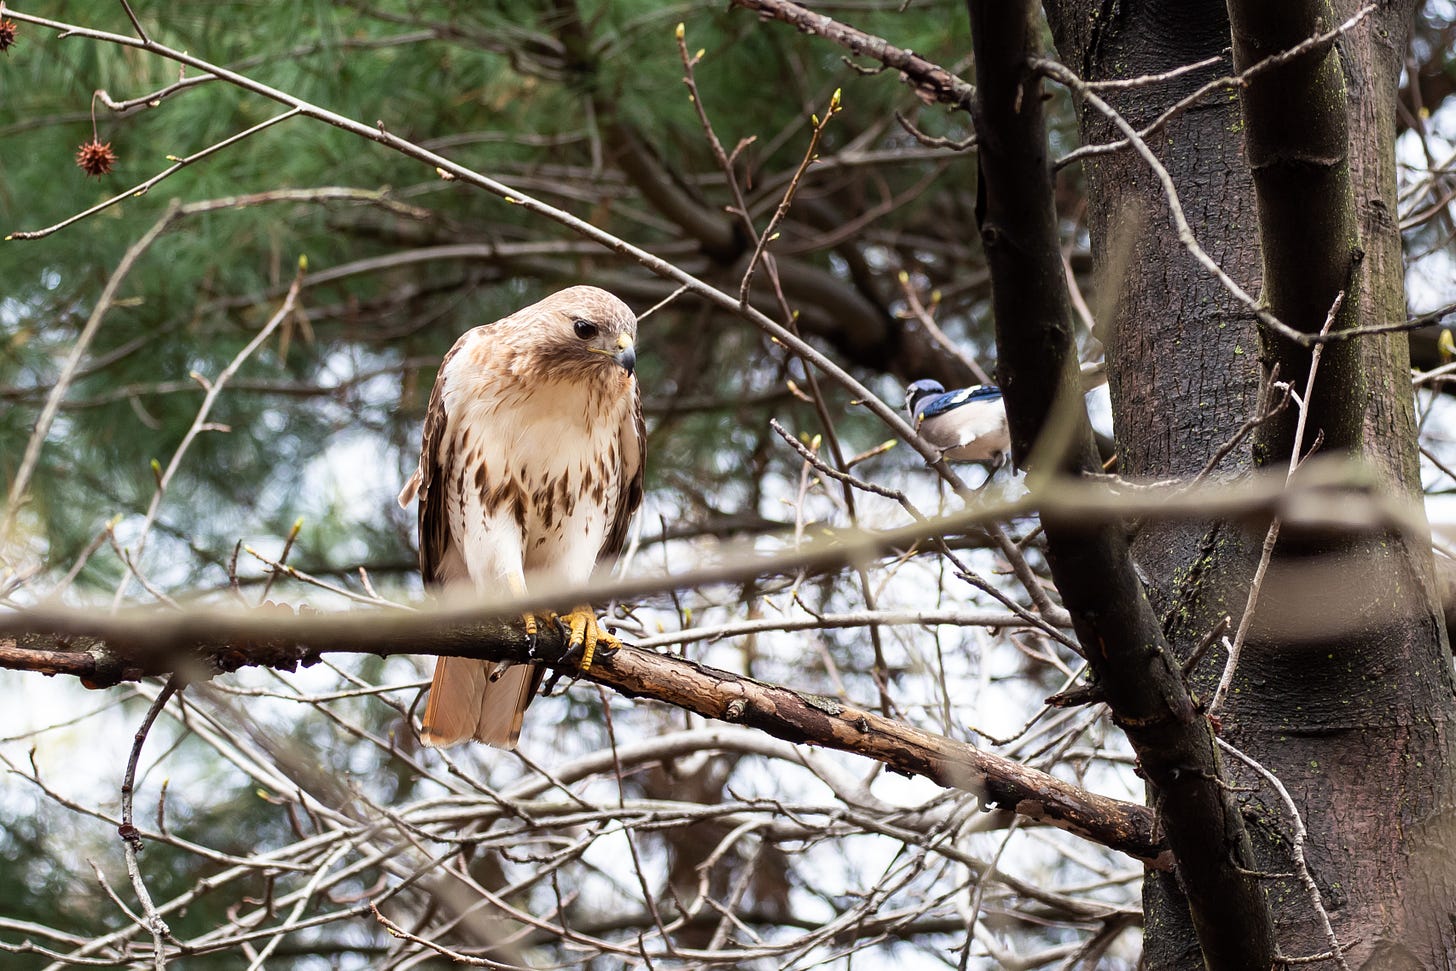 a red-tailed hawk - brown hawk with brown streaking across its belly - perched in a tree and staring down a blue jay, a bird about a tenth the size of the hawk with a white belly and bright blue patterned back, who is shouting directly into the hawk's face